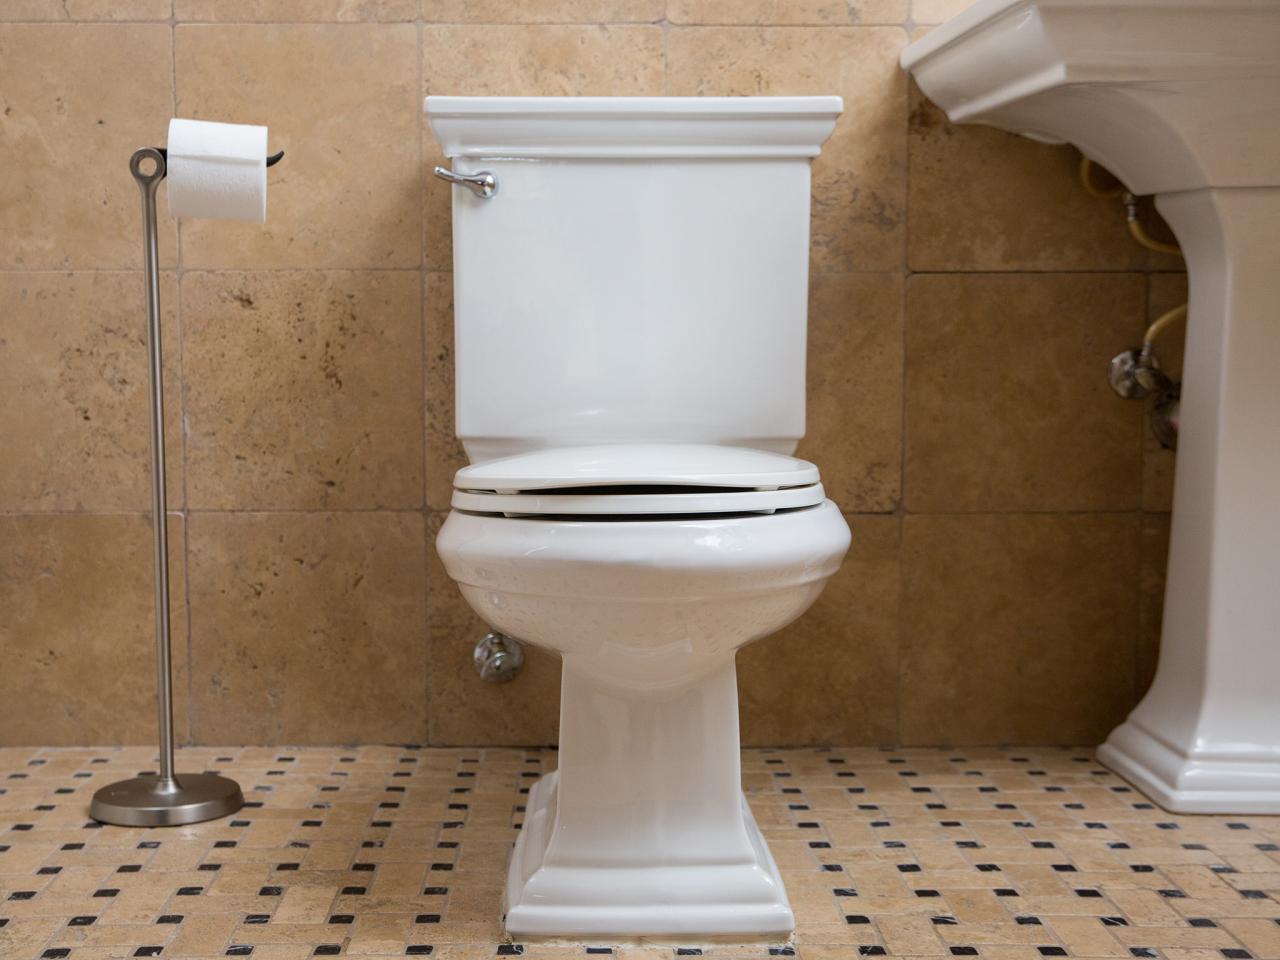 Reasons and Solutions of An Overflowing Toilet